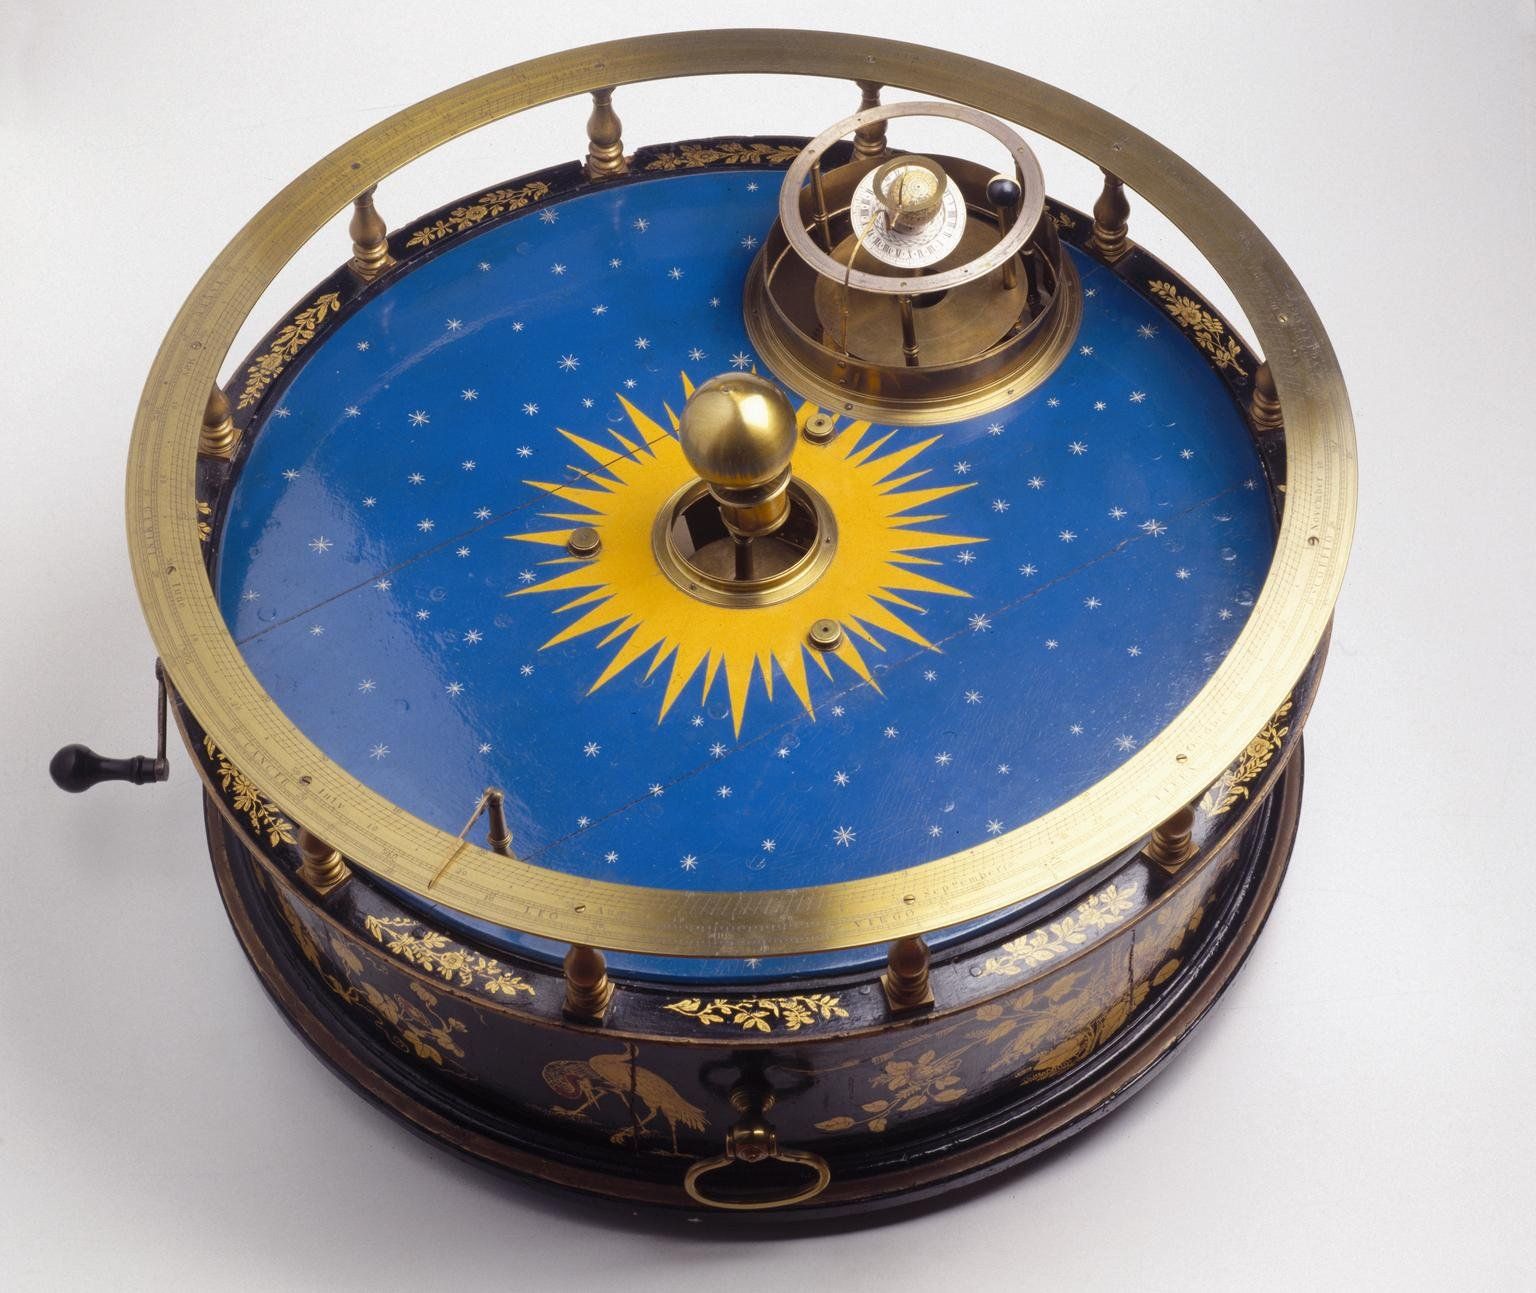 The original orrery, 1712, c. Science Museum Group Collection